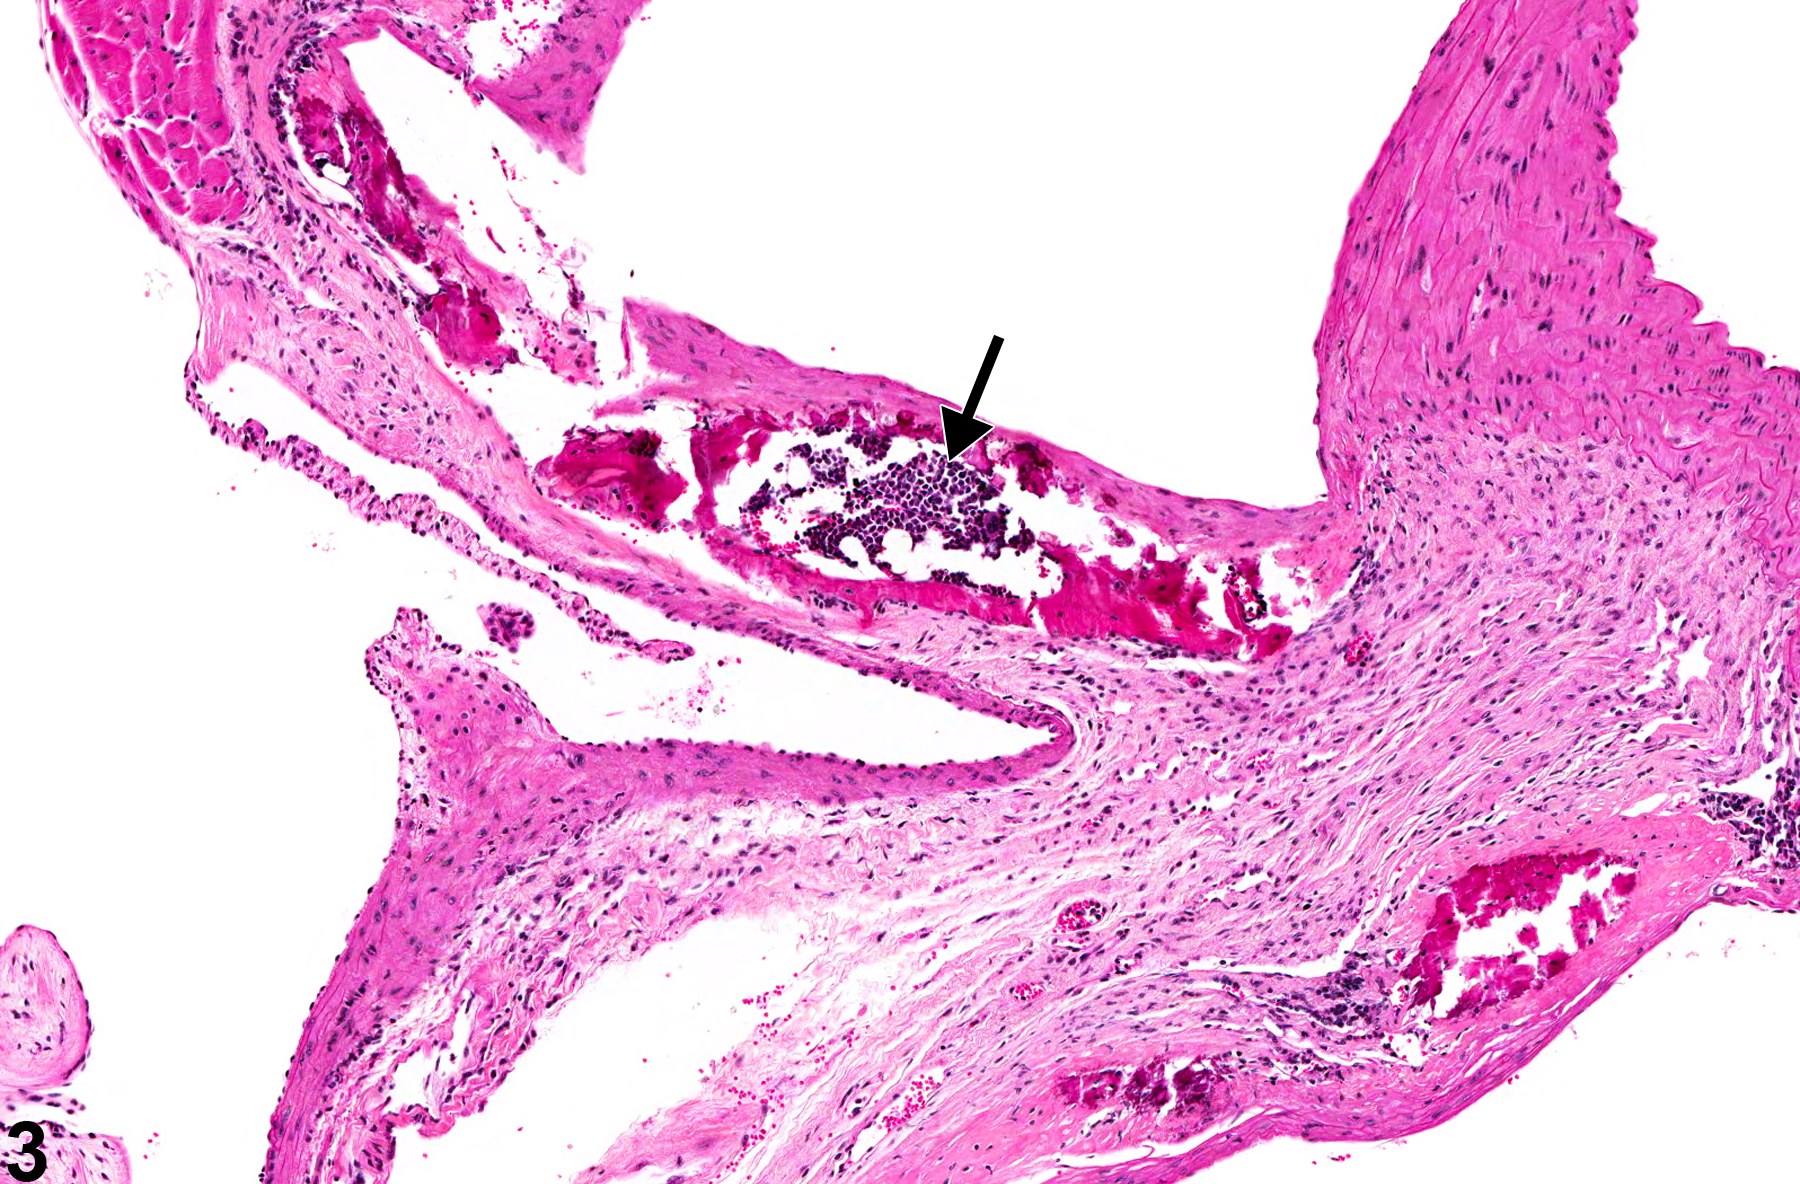 Image of metaplasia, osseous in the aorta from a female B6C3F1/N mouse in a subchronic study